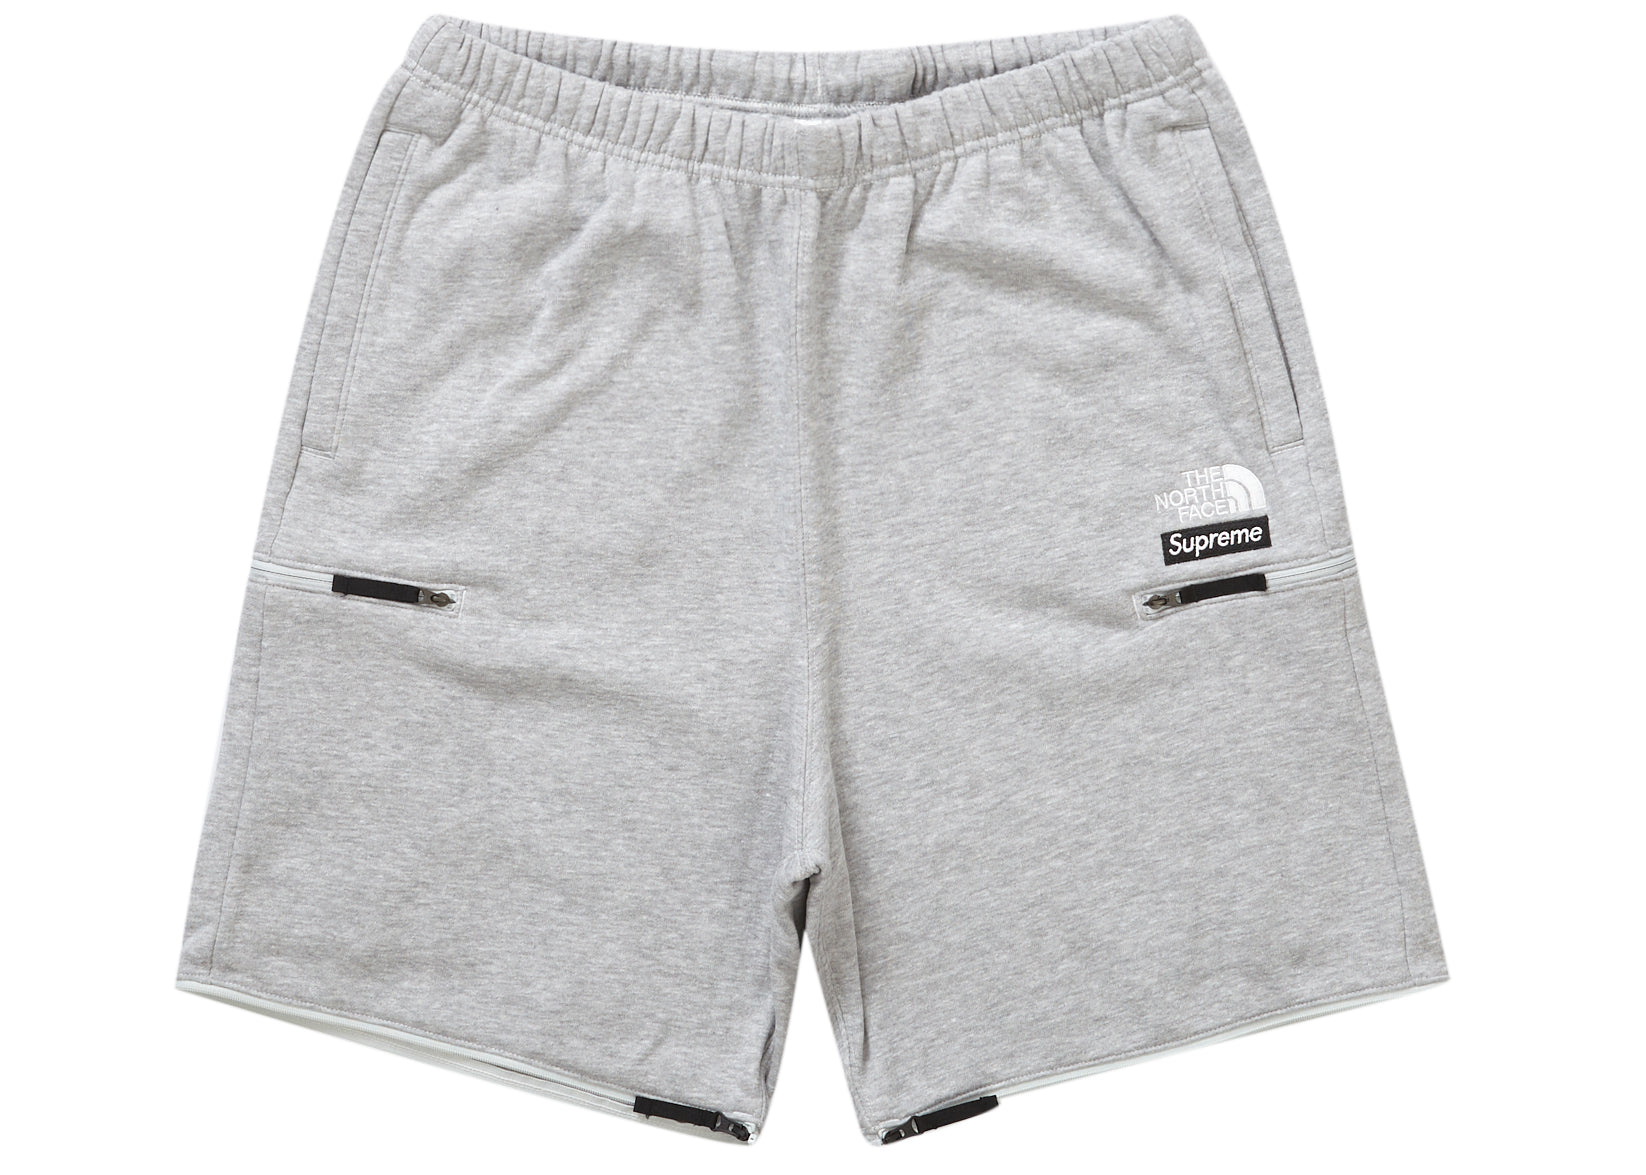 Supreme The North Face Convertible Sweatpant Heather Grey – LacedUp